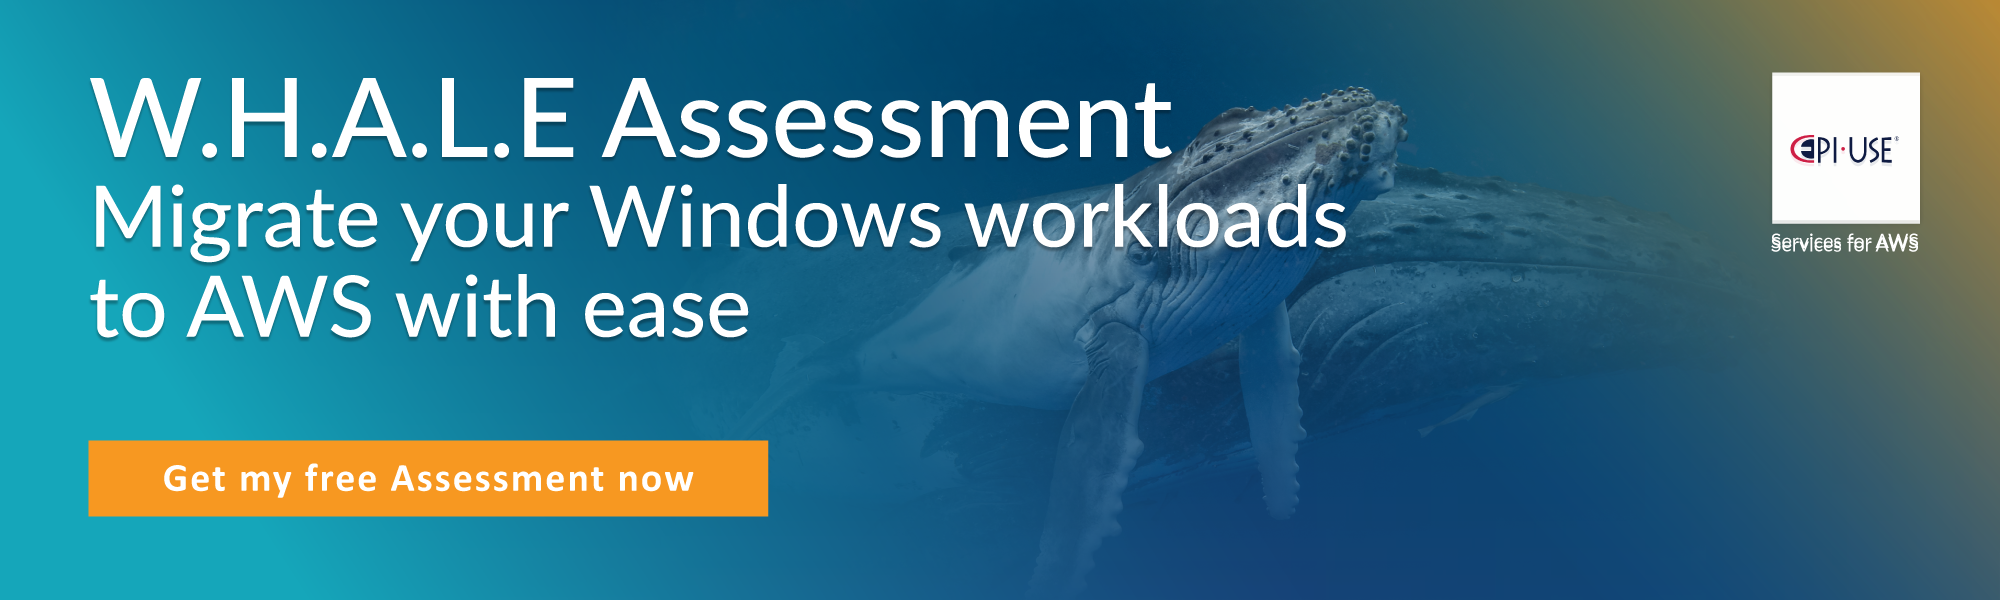 WHALE Assessment - migrating windows workloads to AWS